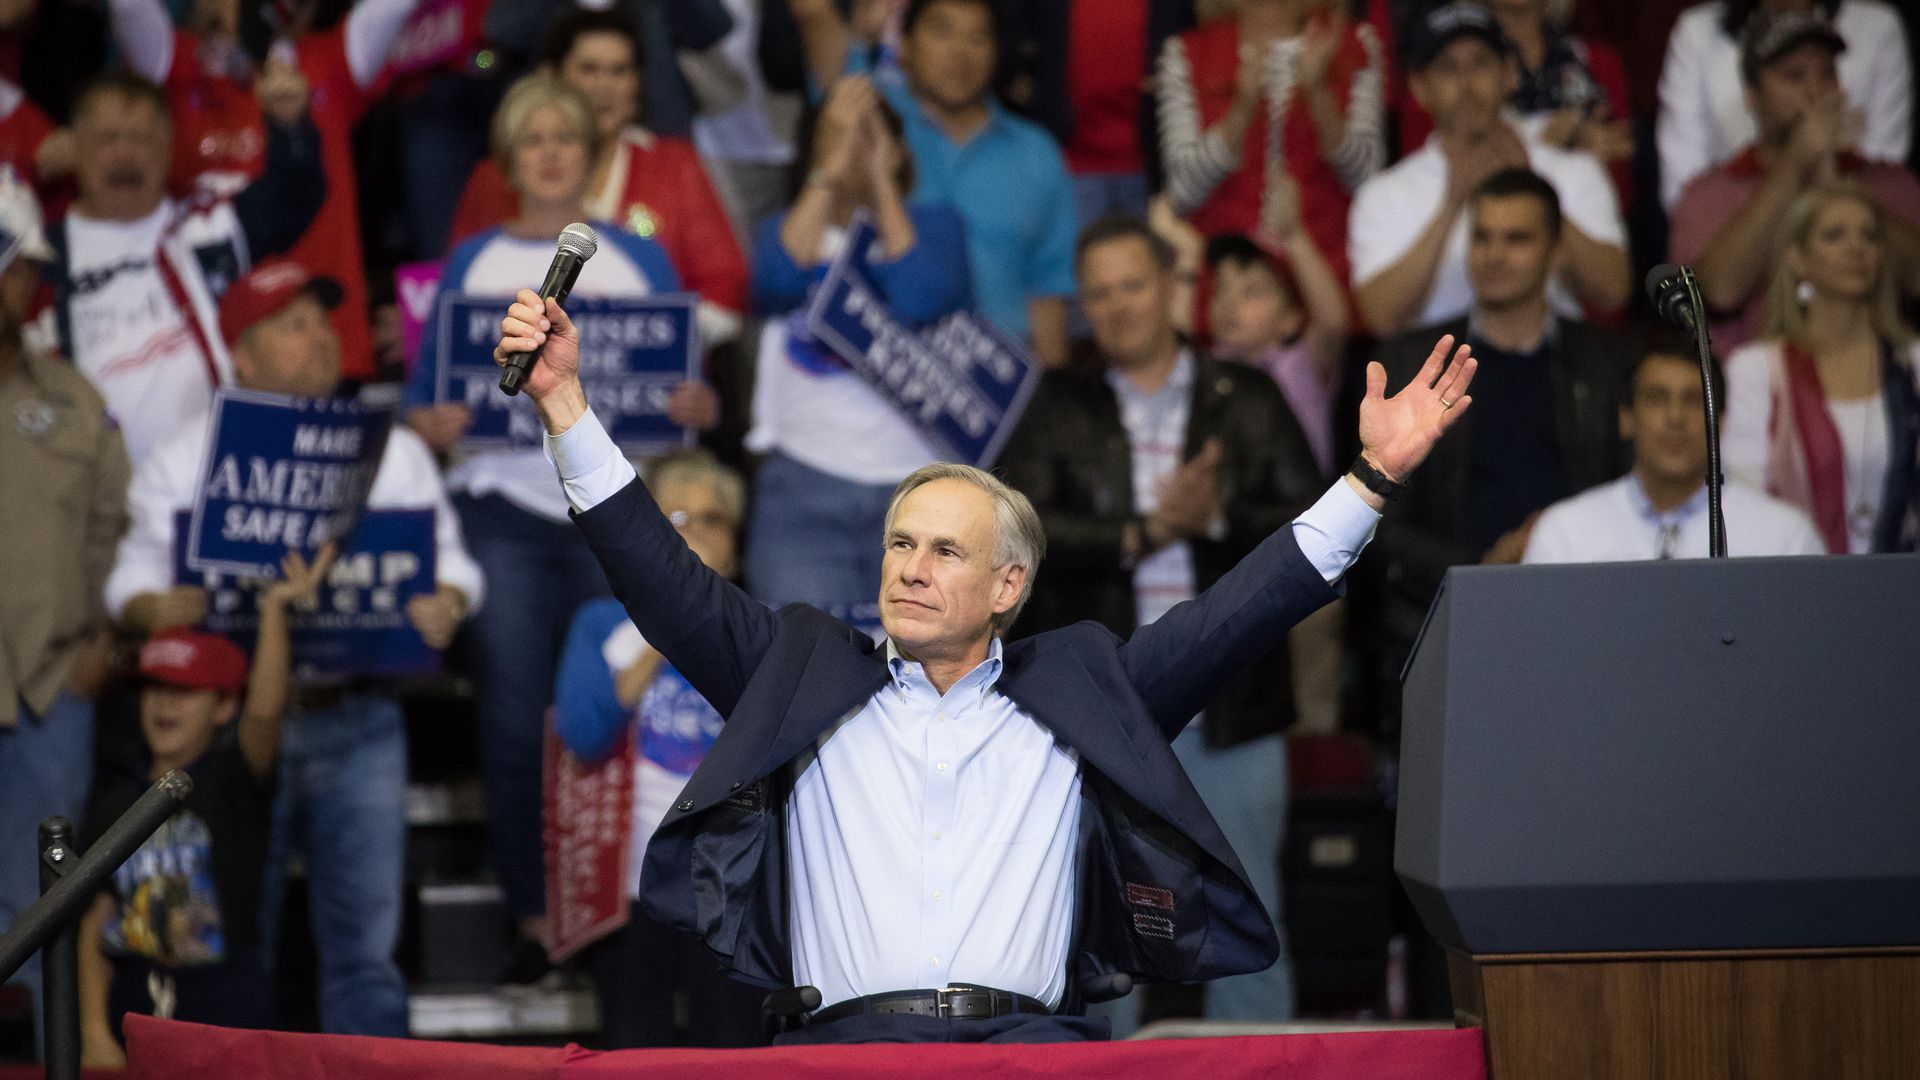 Greg Abbott at a rally, holding his hands up victoriously.